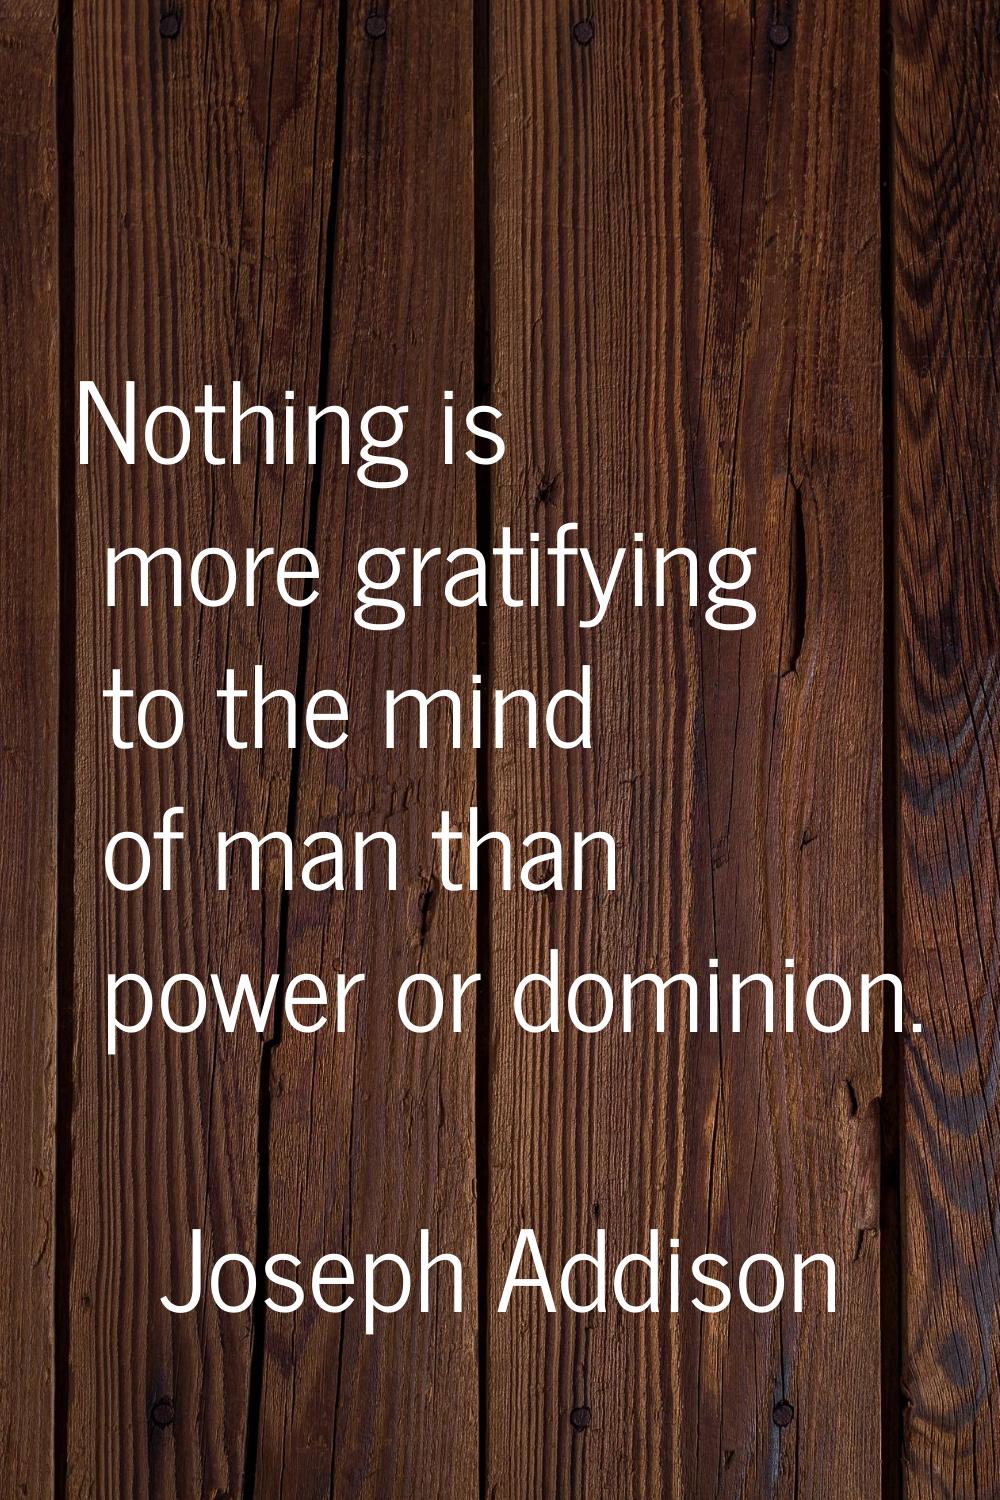 Nothing is more gratifying to the mind of man than power or dominion.